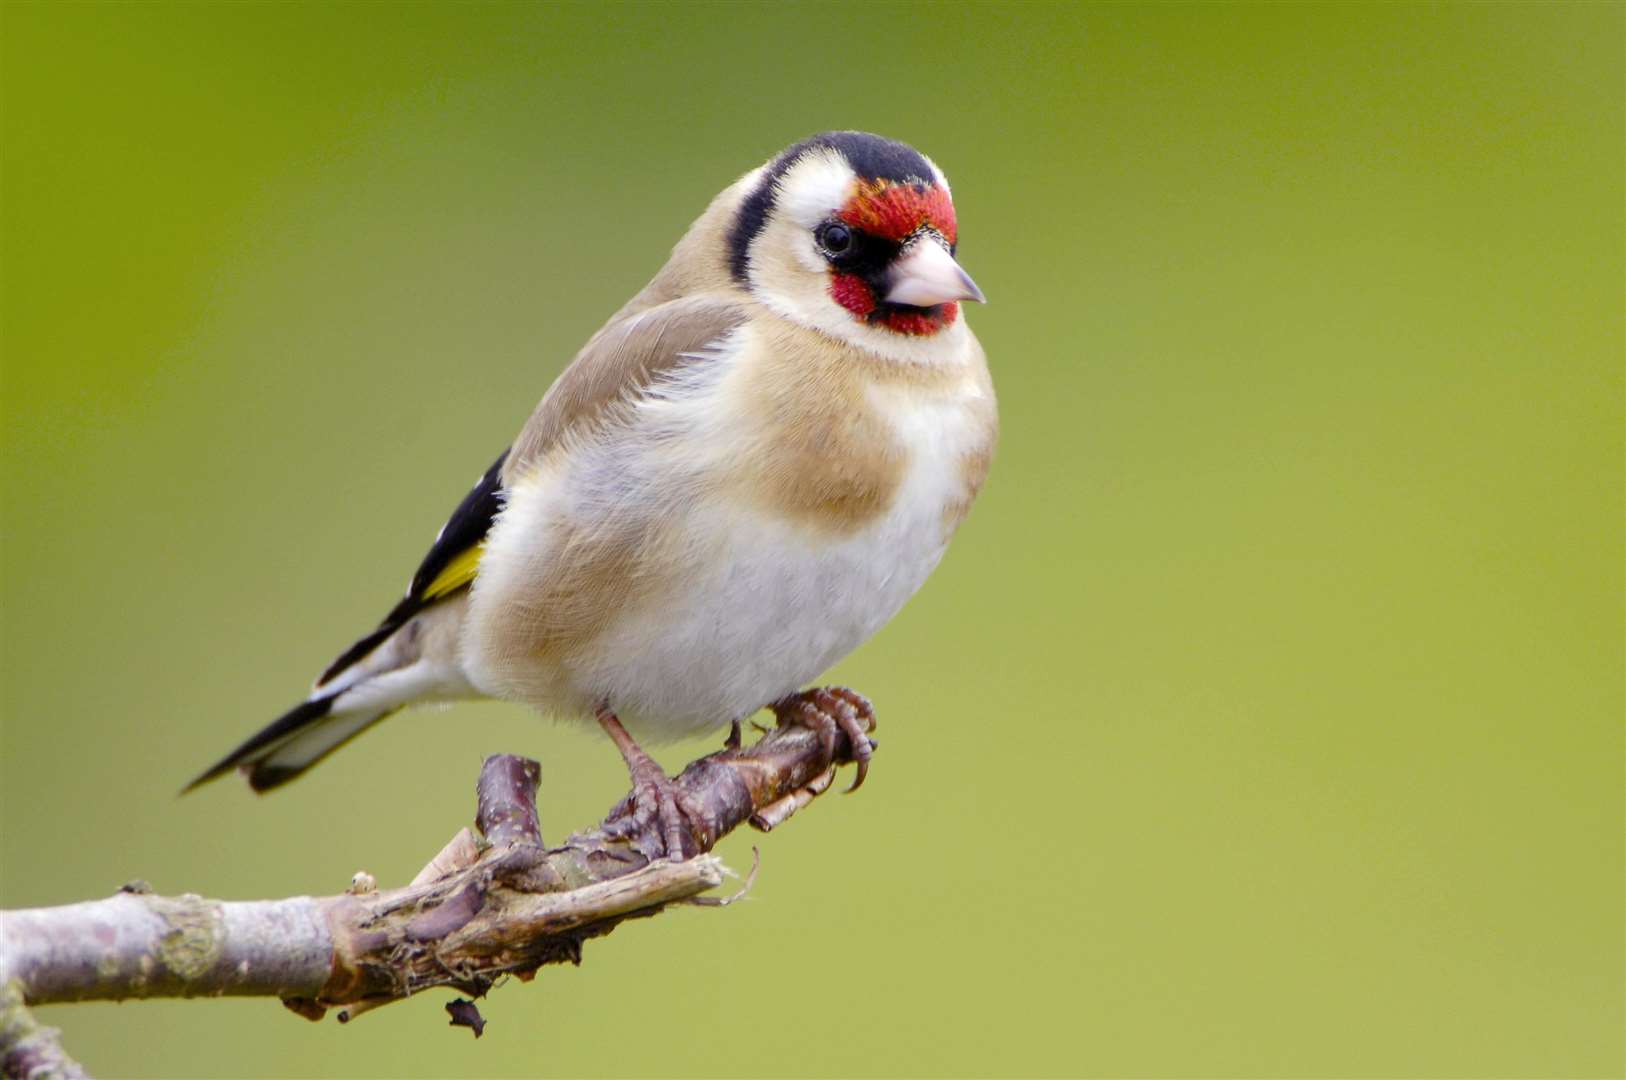 Garden species such as goldfinch are showing positive signs of recovery. Photo: Lorne Gill/NatureScot